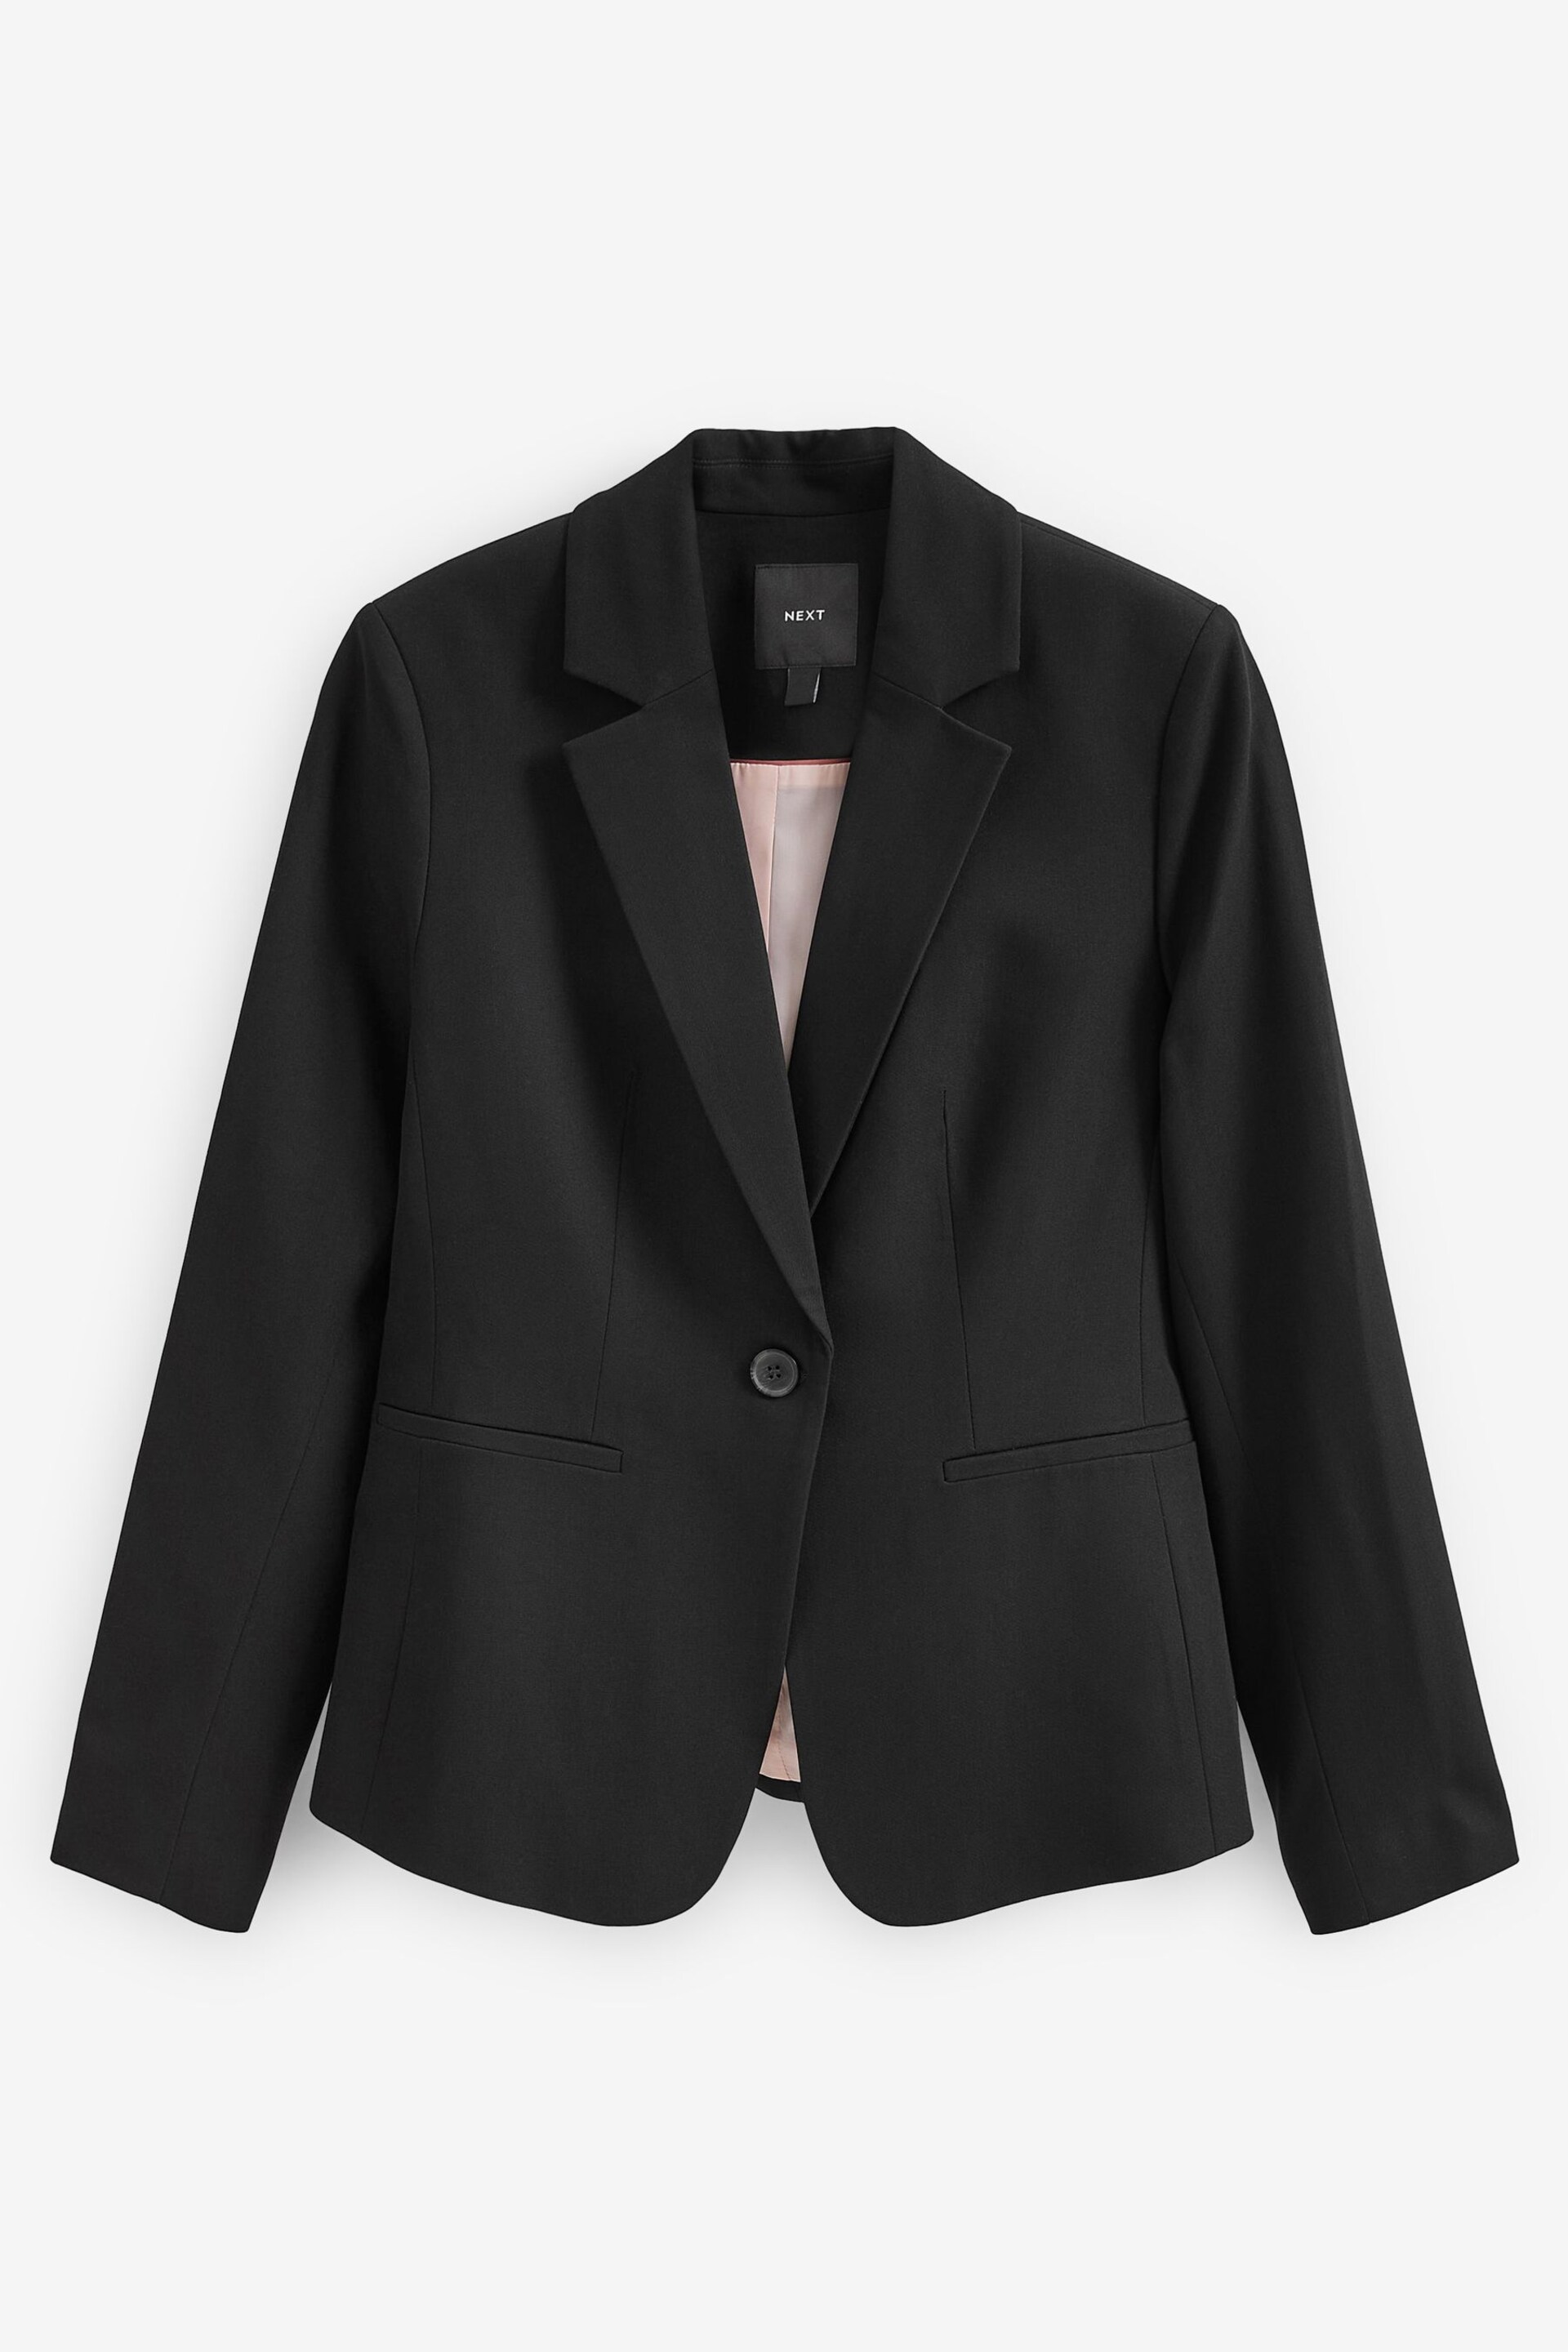 Black Tailored Single Breasted Blazer - Image 6 of 7